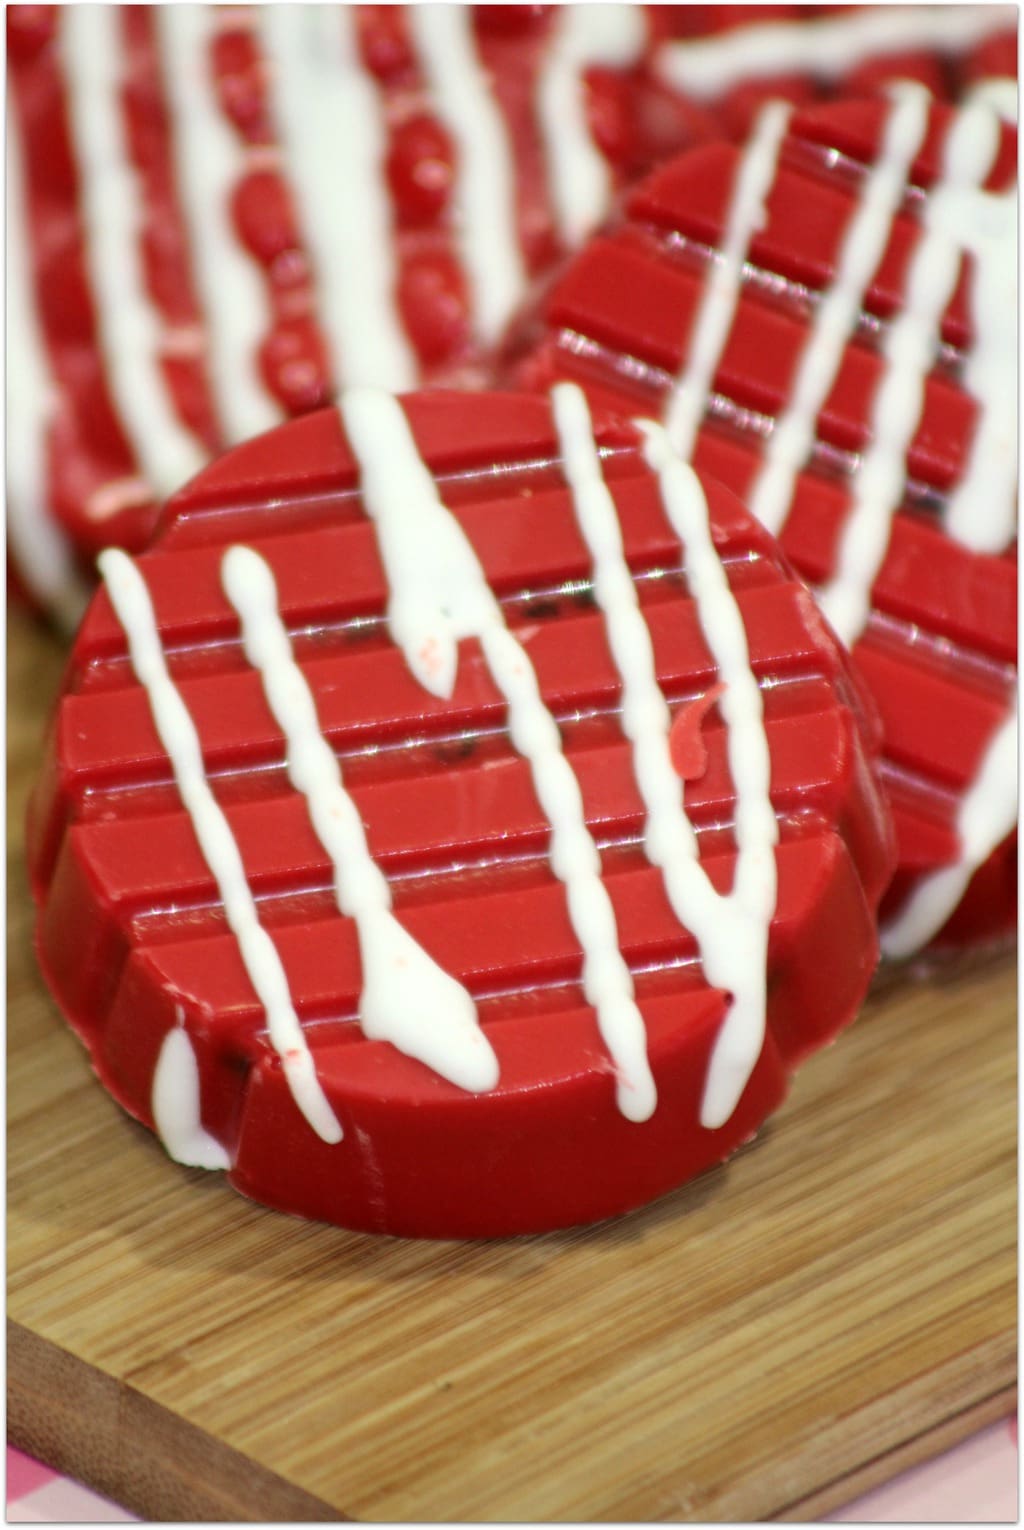 These chocolate dipped Valentine's Oreos are the bomb! If you're looking for a simple way to make a festive dessert, this easy recipe is for you! You'll have fun in the kitchen with your kids making them and be a rockstar mom at the class party! 